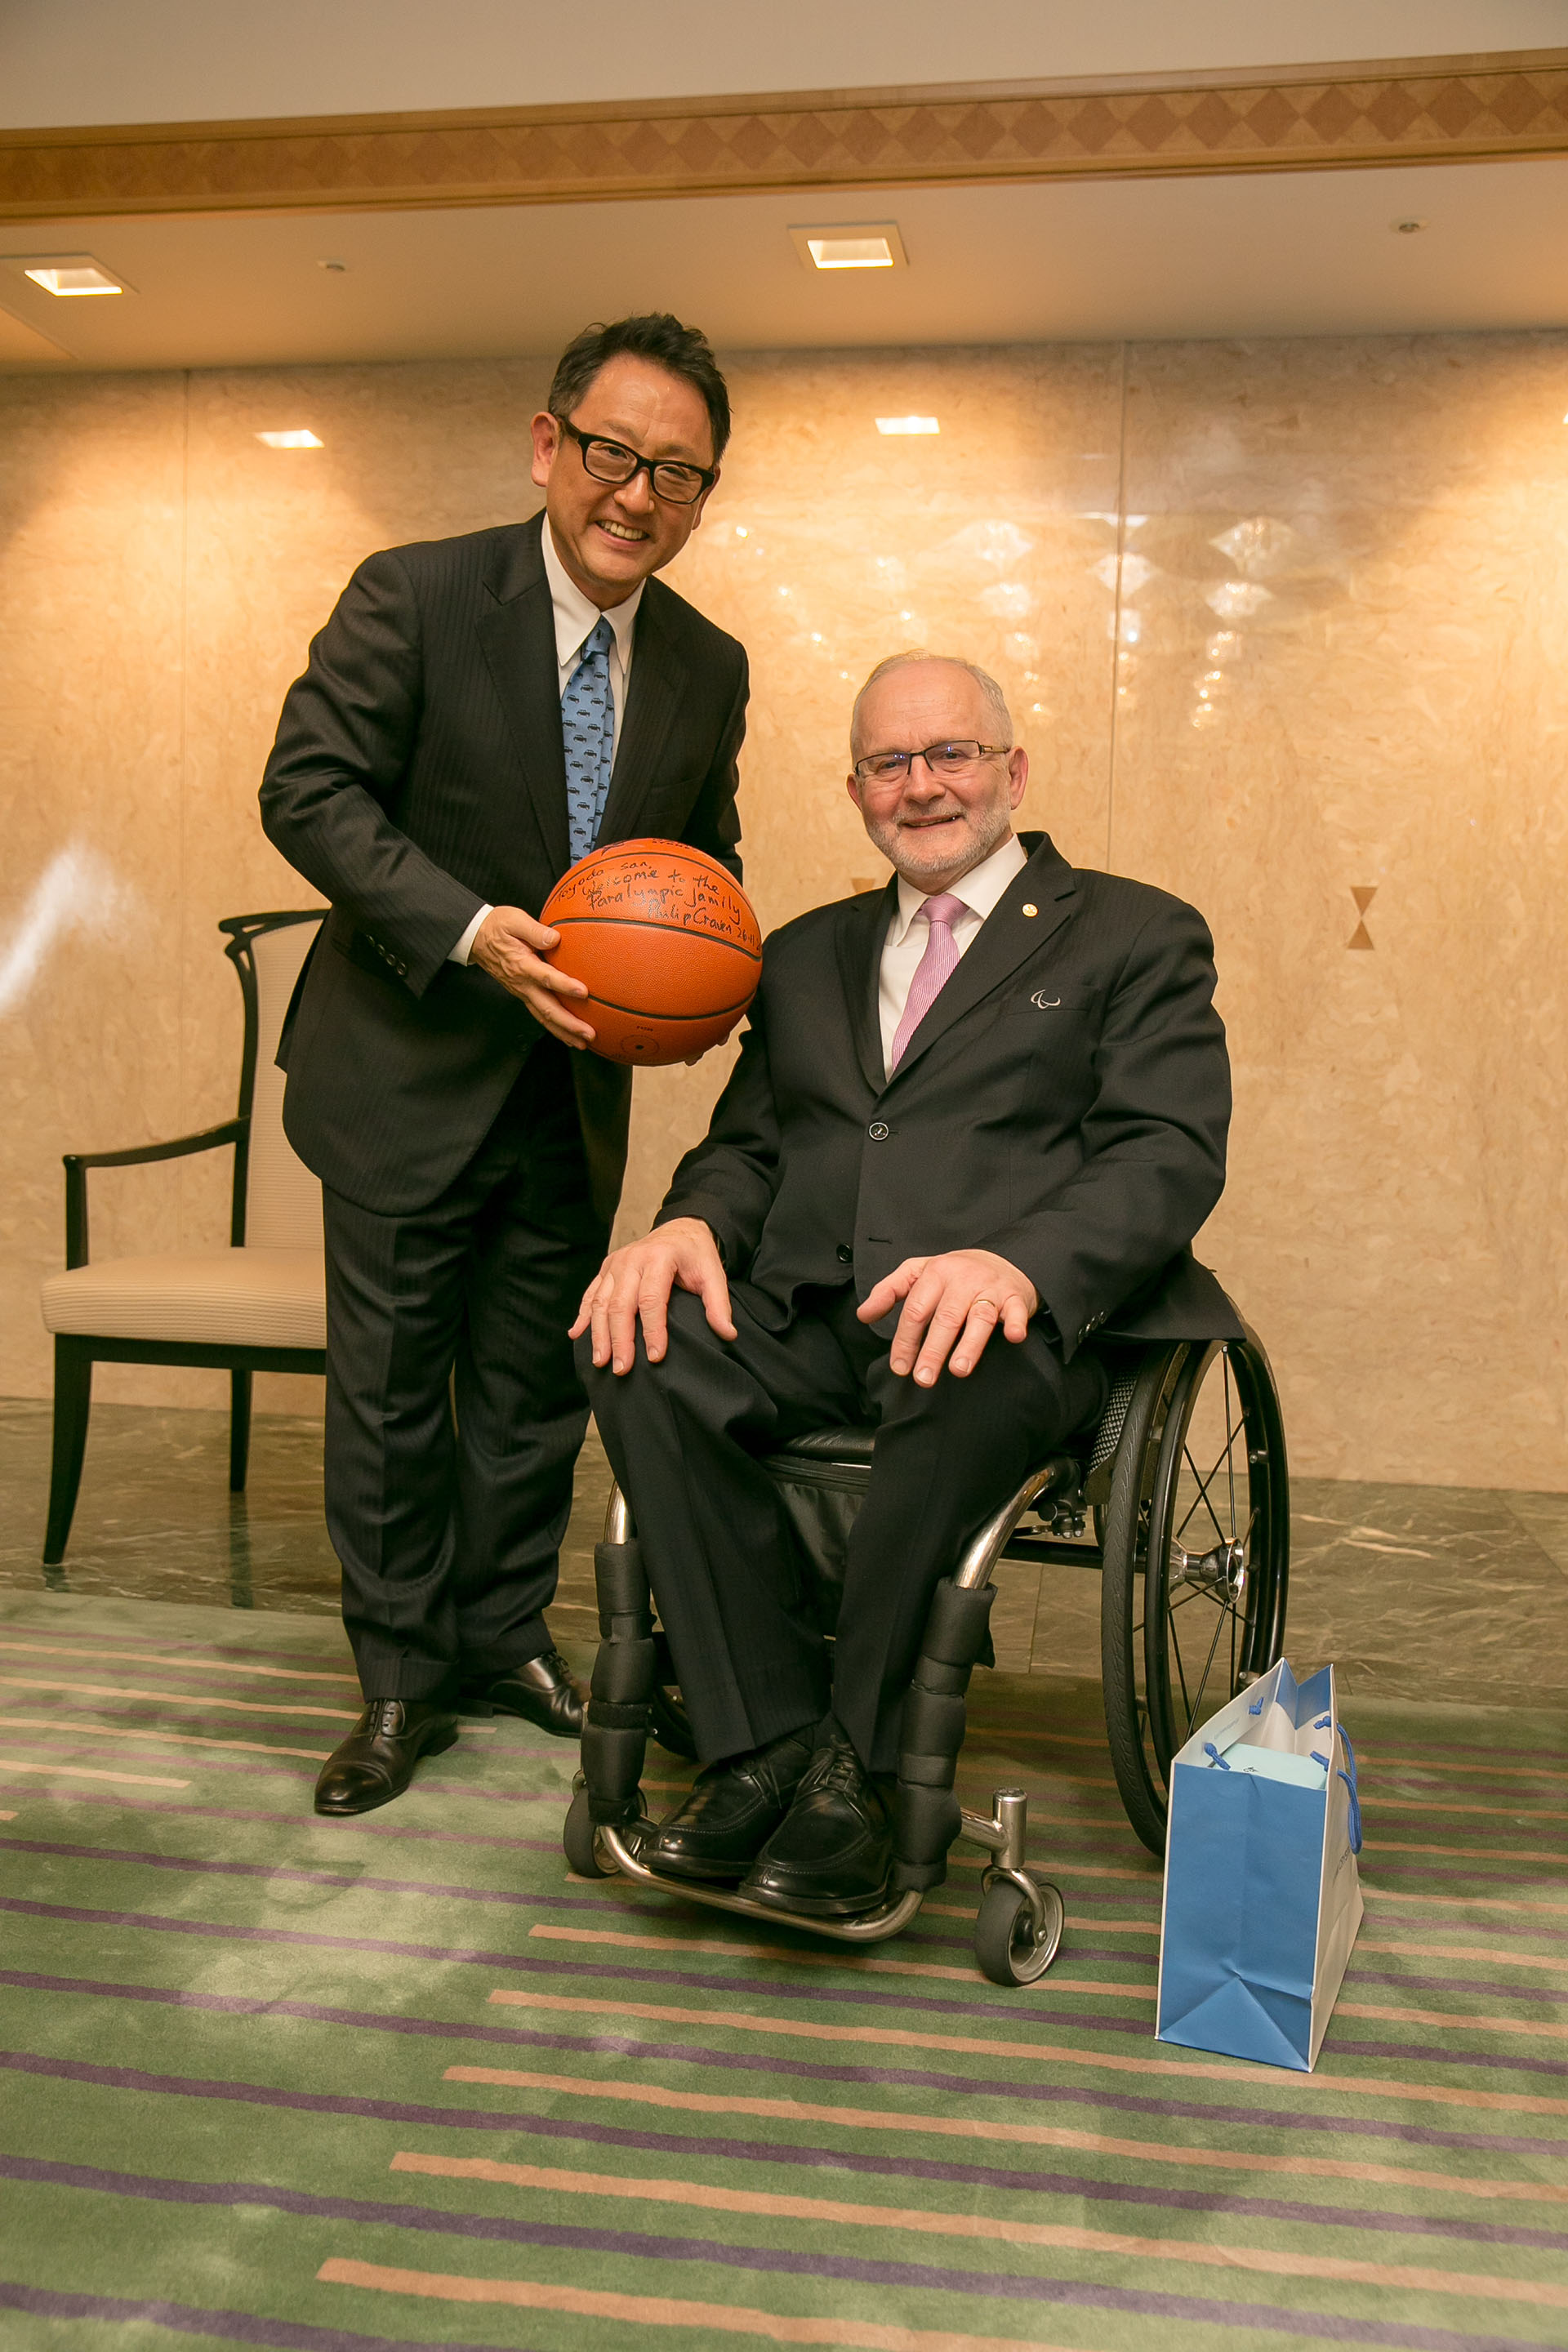 Toyota President Akio Toyoda and International Paralympic Committee President Sir Philip Craven